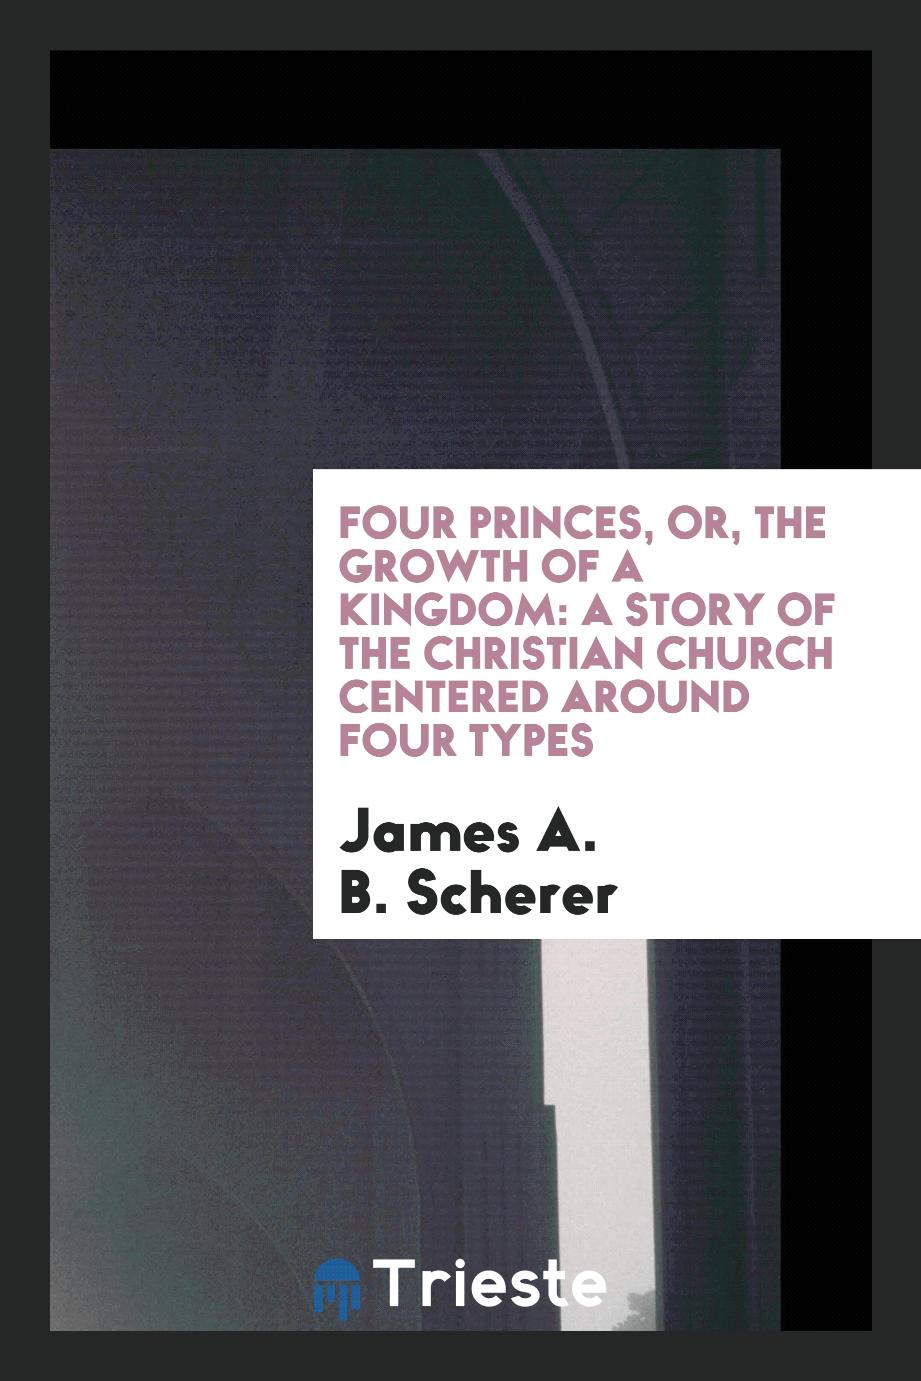 Four princes, or, The growth of a kingdom: a story of the Christian Church centered around four types